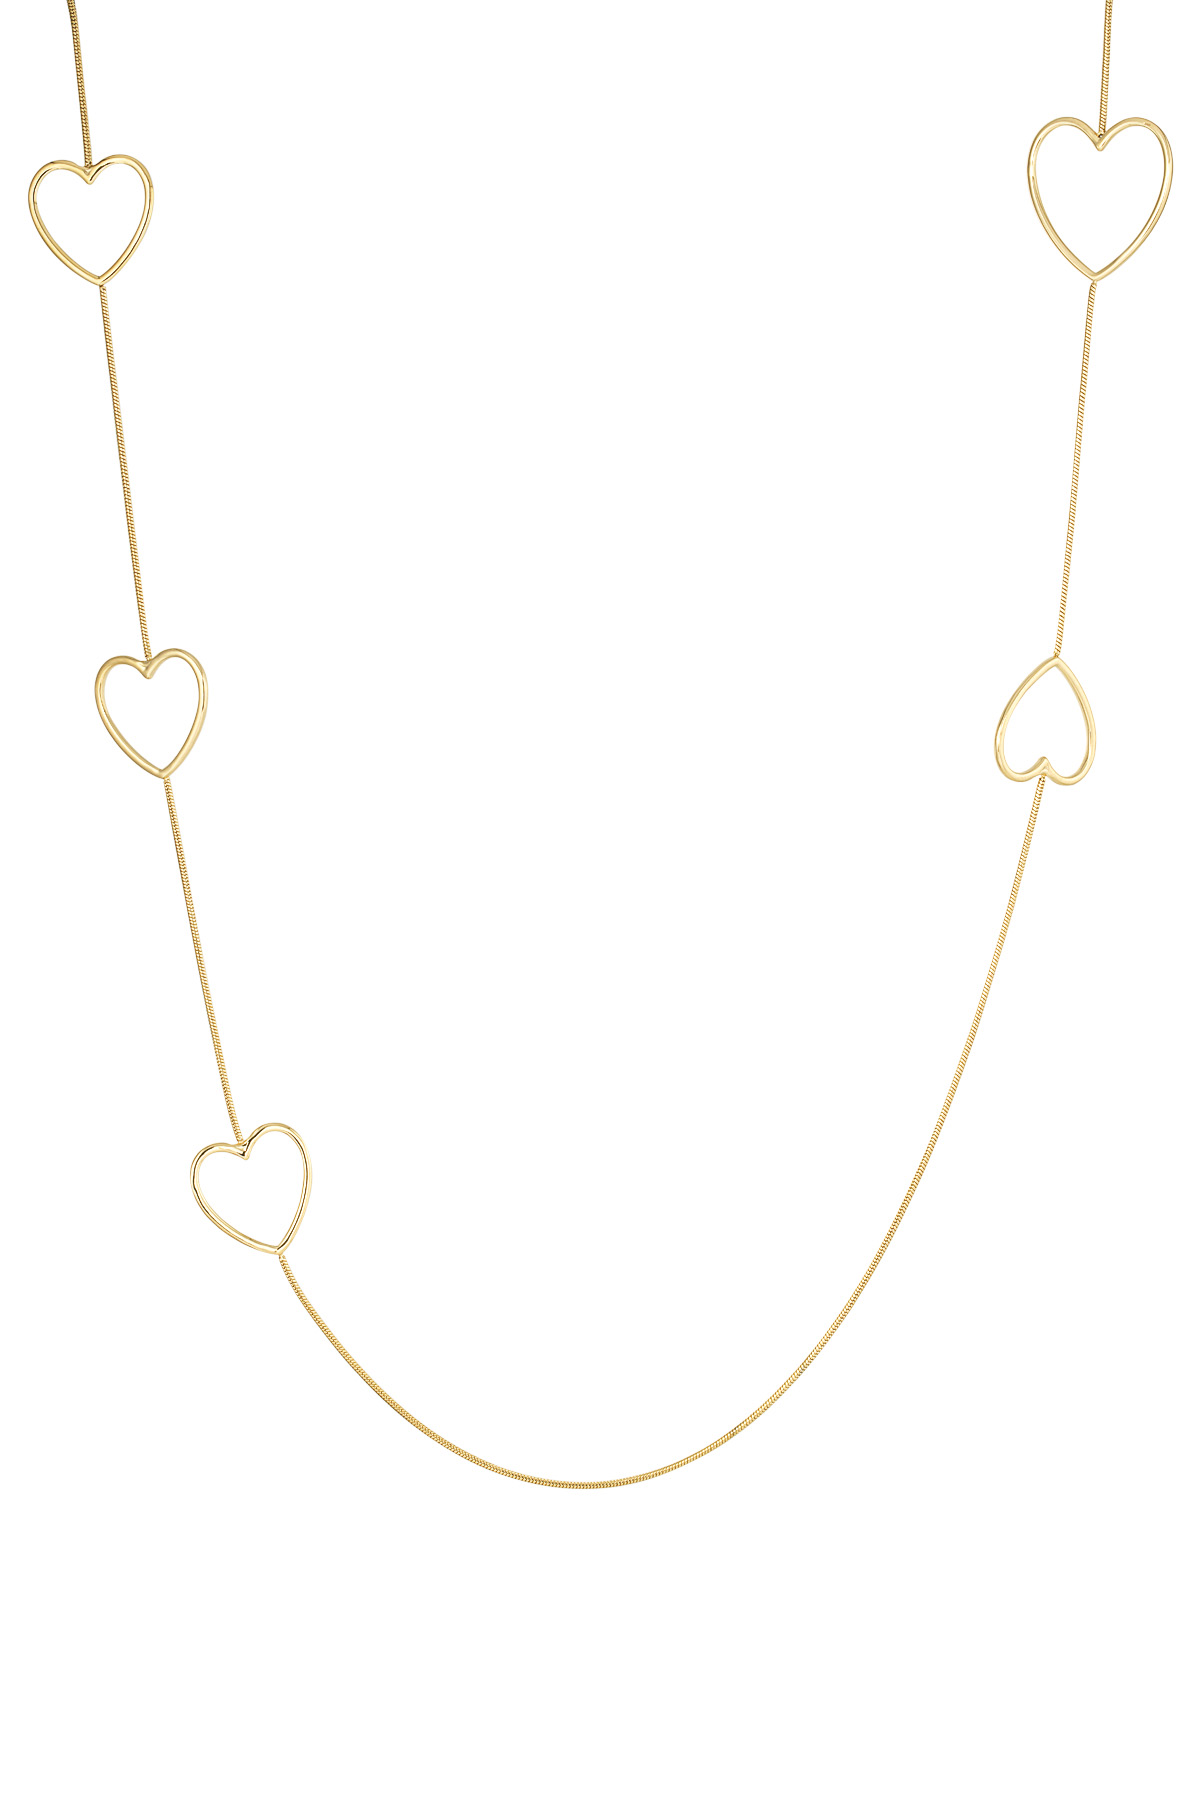 Long necklace totally in love - gold